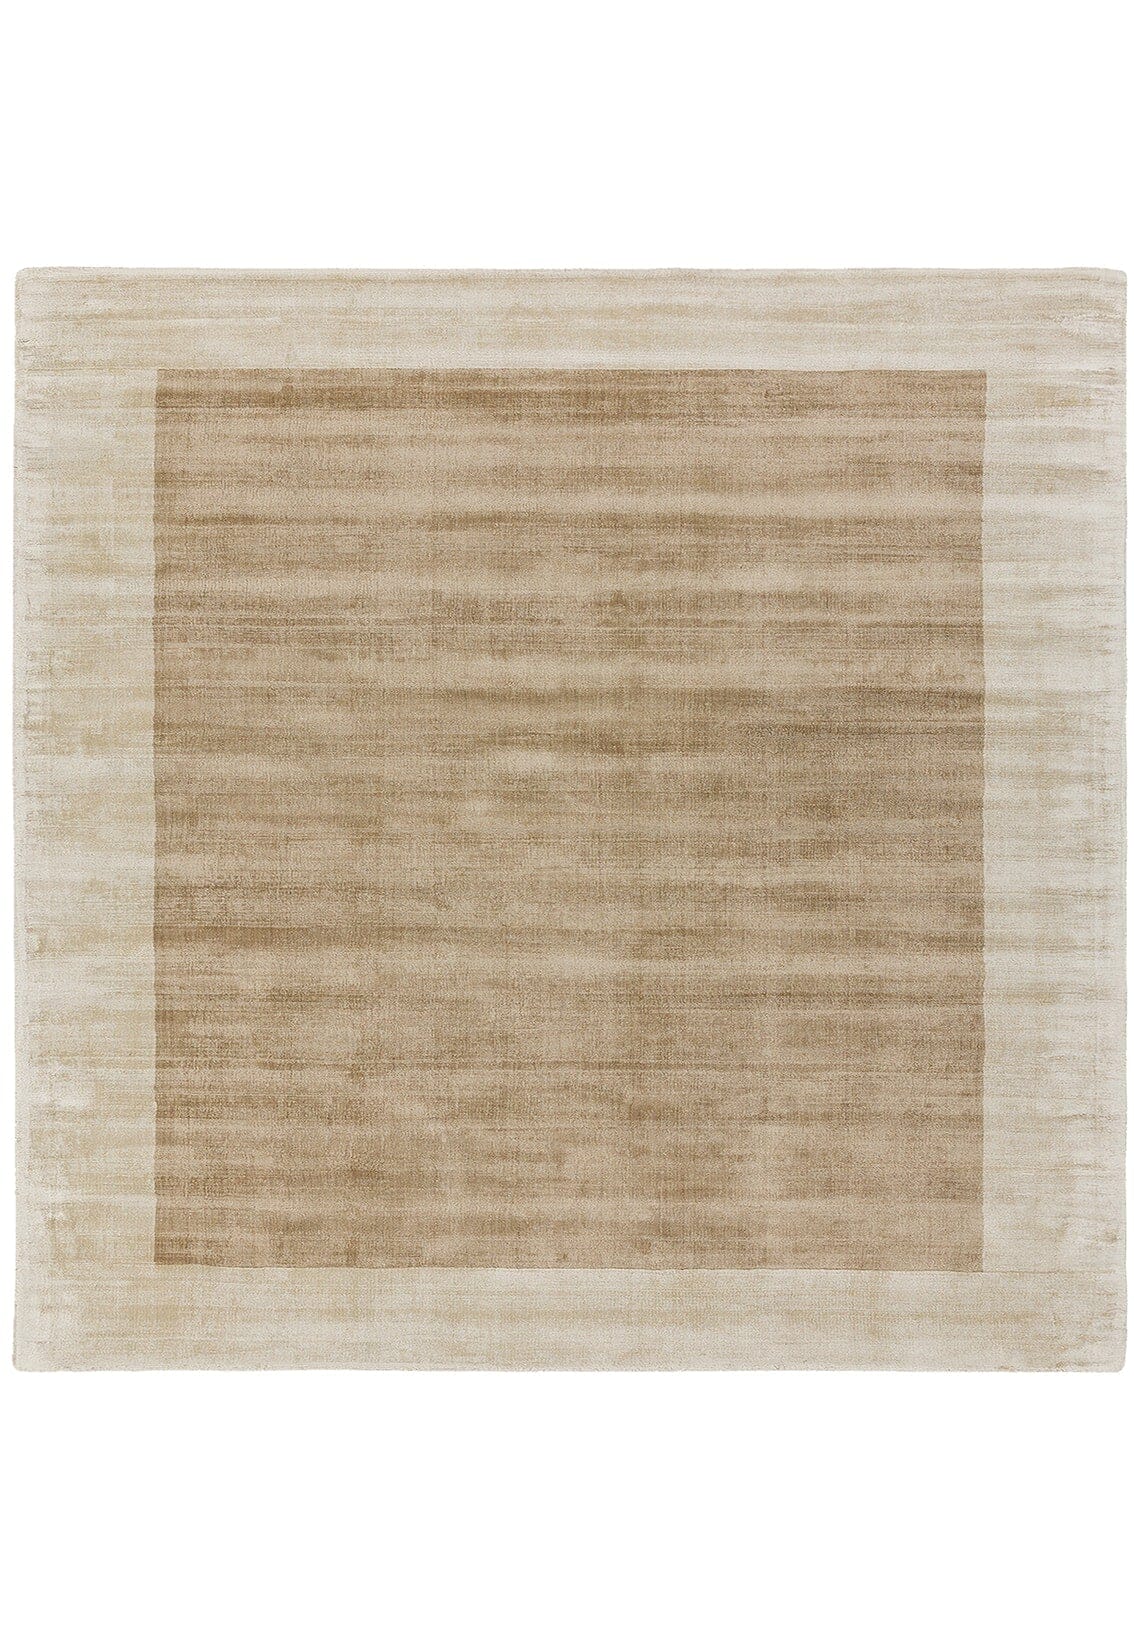  Asiatic Carpets-Asiatic Carpets Blade Hand Woven Rug Putty Champagne - 160 x 230cm-Beige, Natural 085 